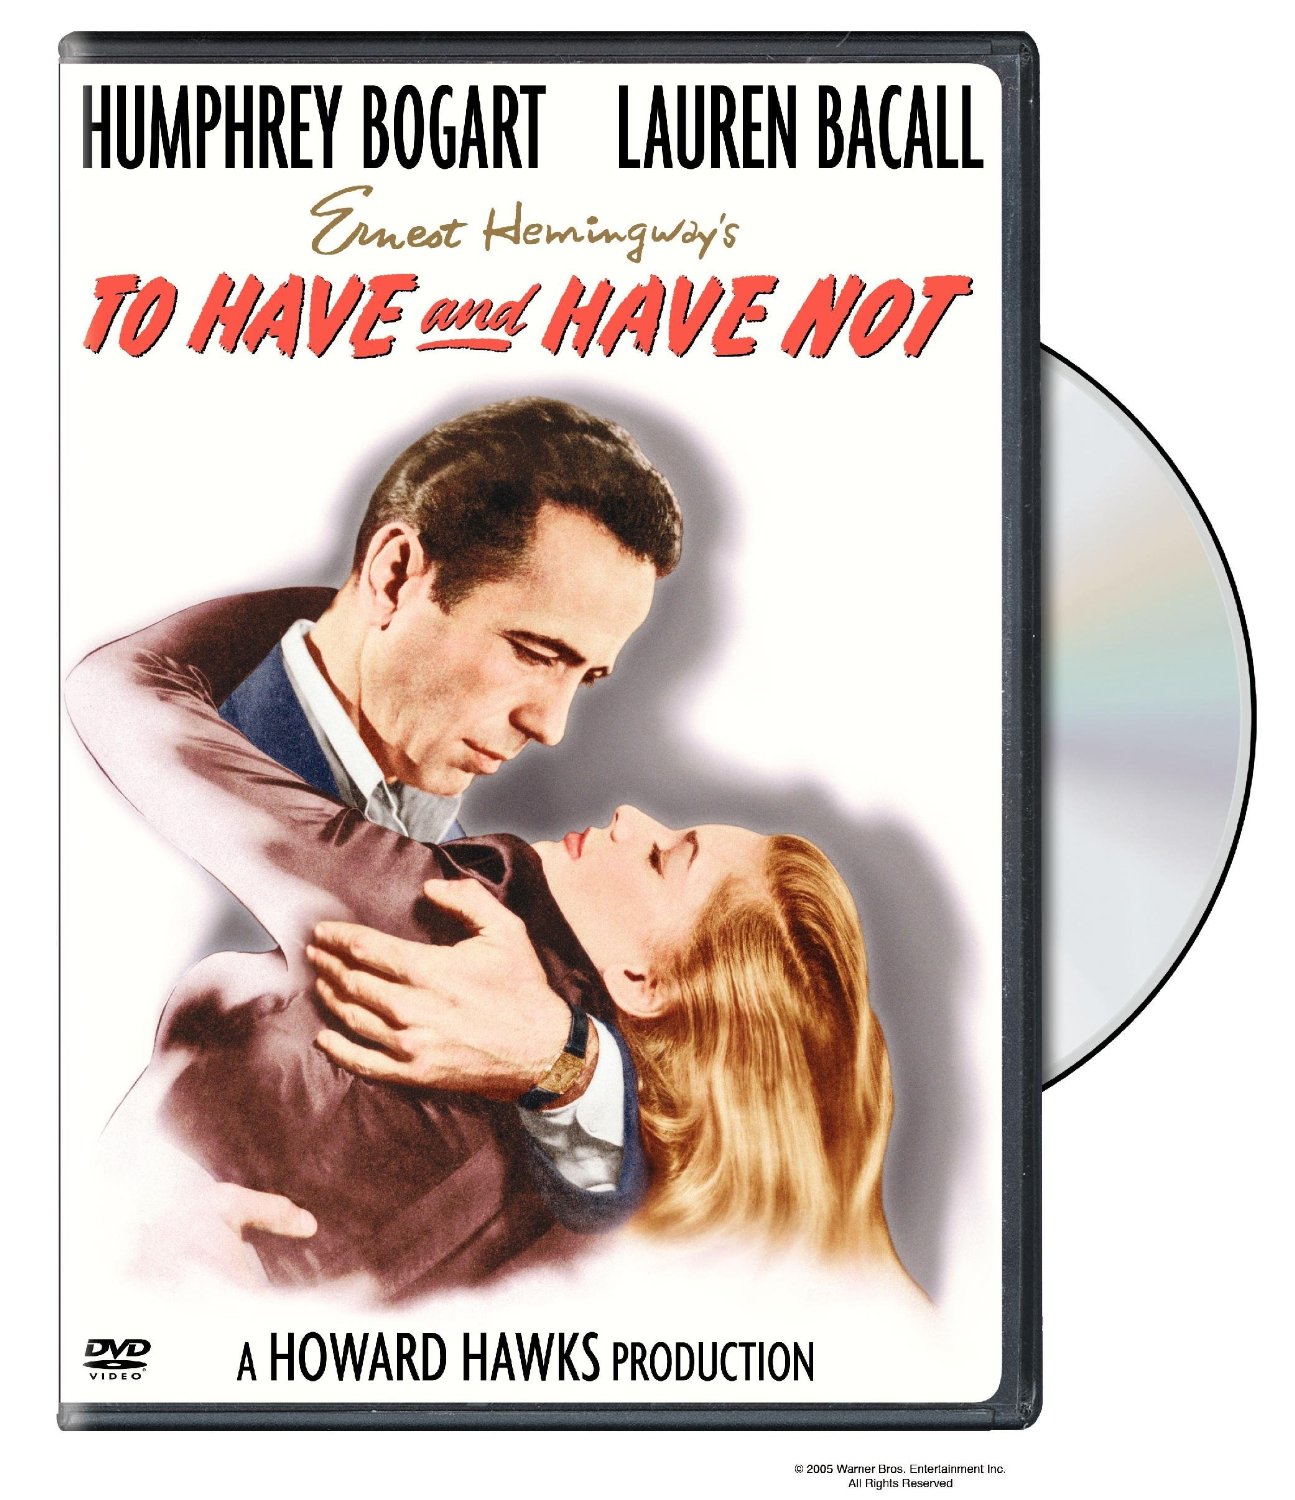 To Have and Have Not, a Howard Hawks film starring Humphrey Bogart and Lauren Bacall